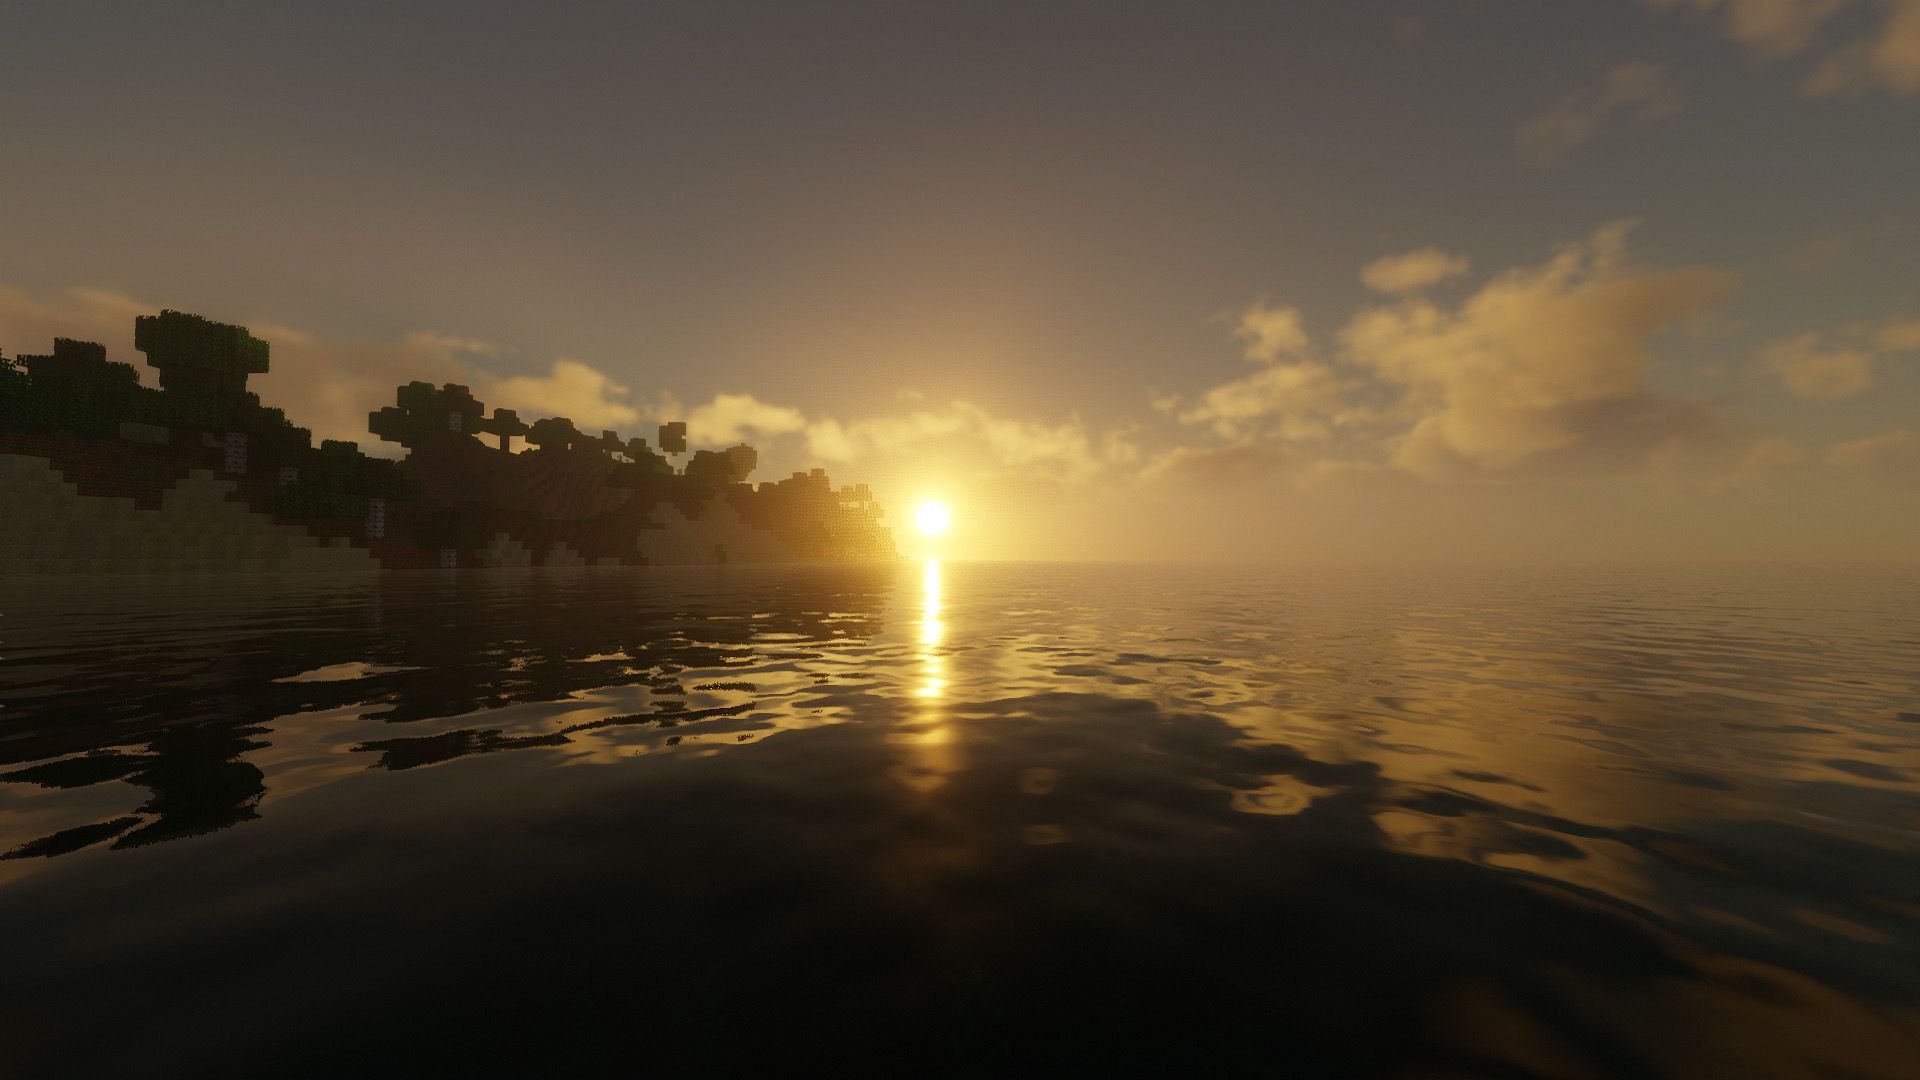 Sunset Reflection On Body Of Water HD Minecraft Wallpaper